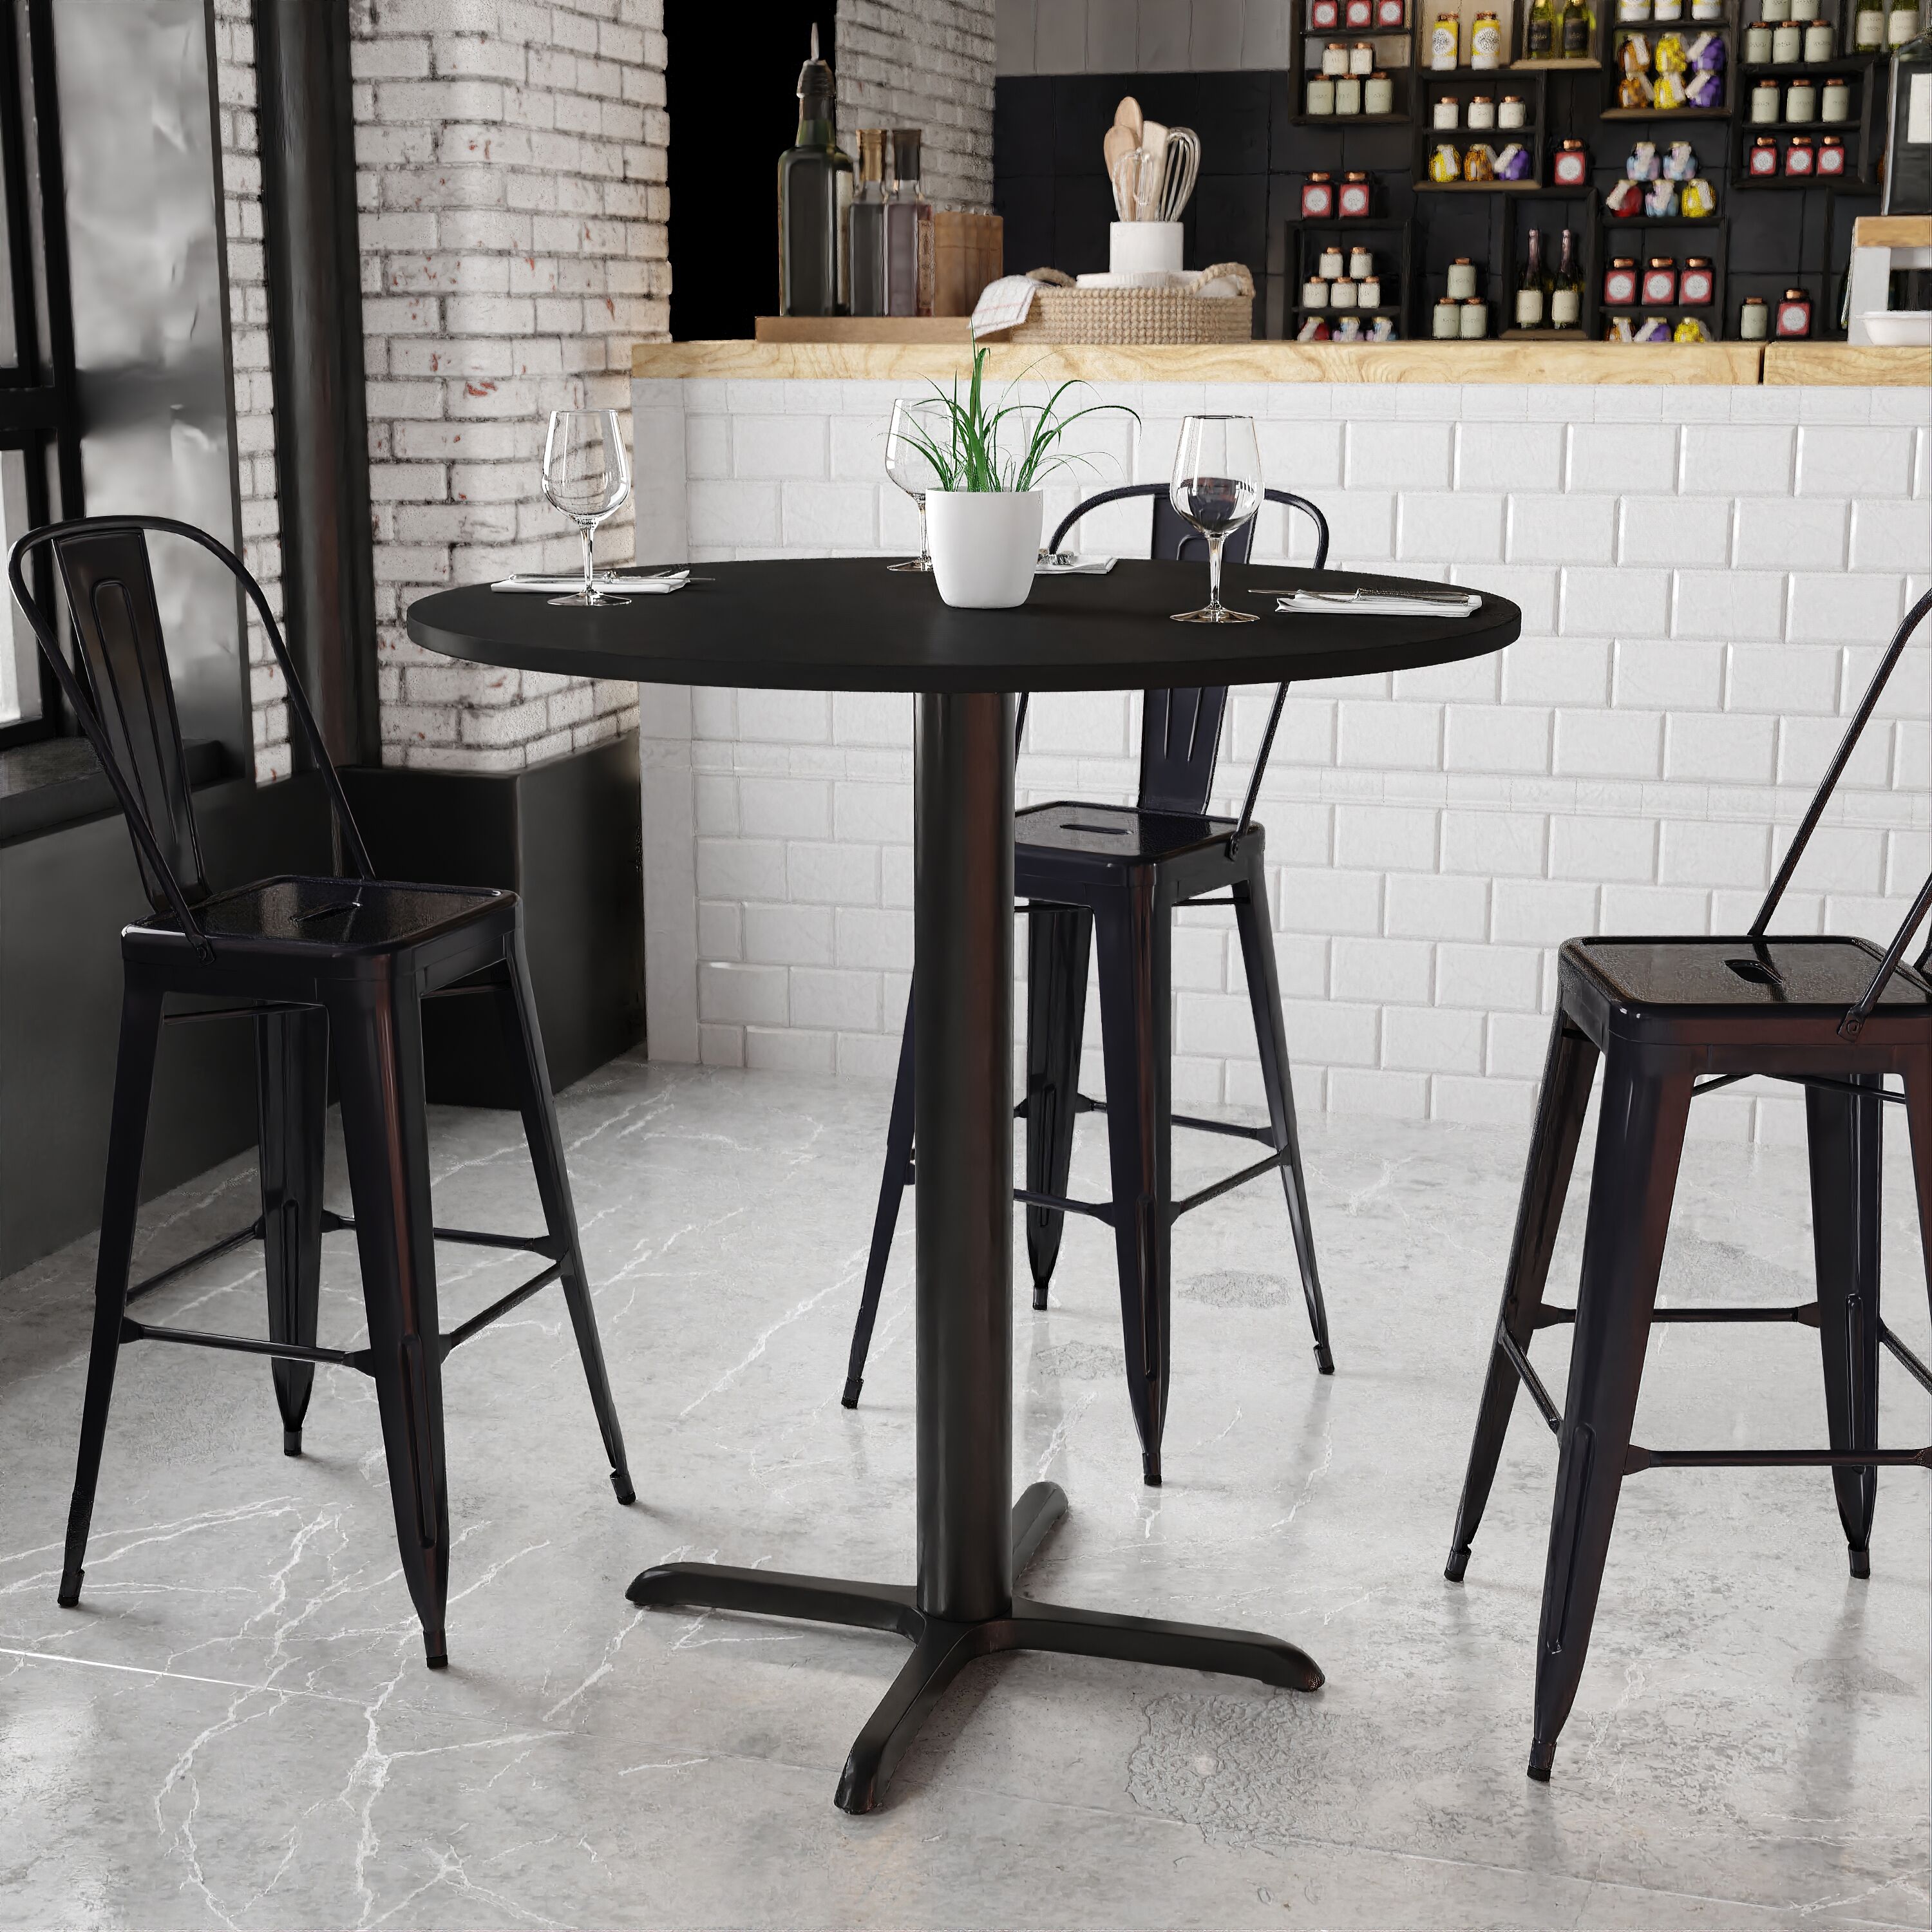 Modern Bar Table Kitchen Dining Table Round Pub Table Hydraulic Dining Room  Home Kitchen Table Bar Top Table Tall Table